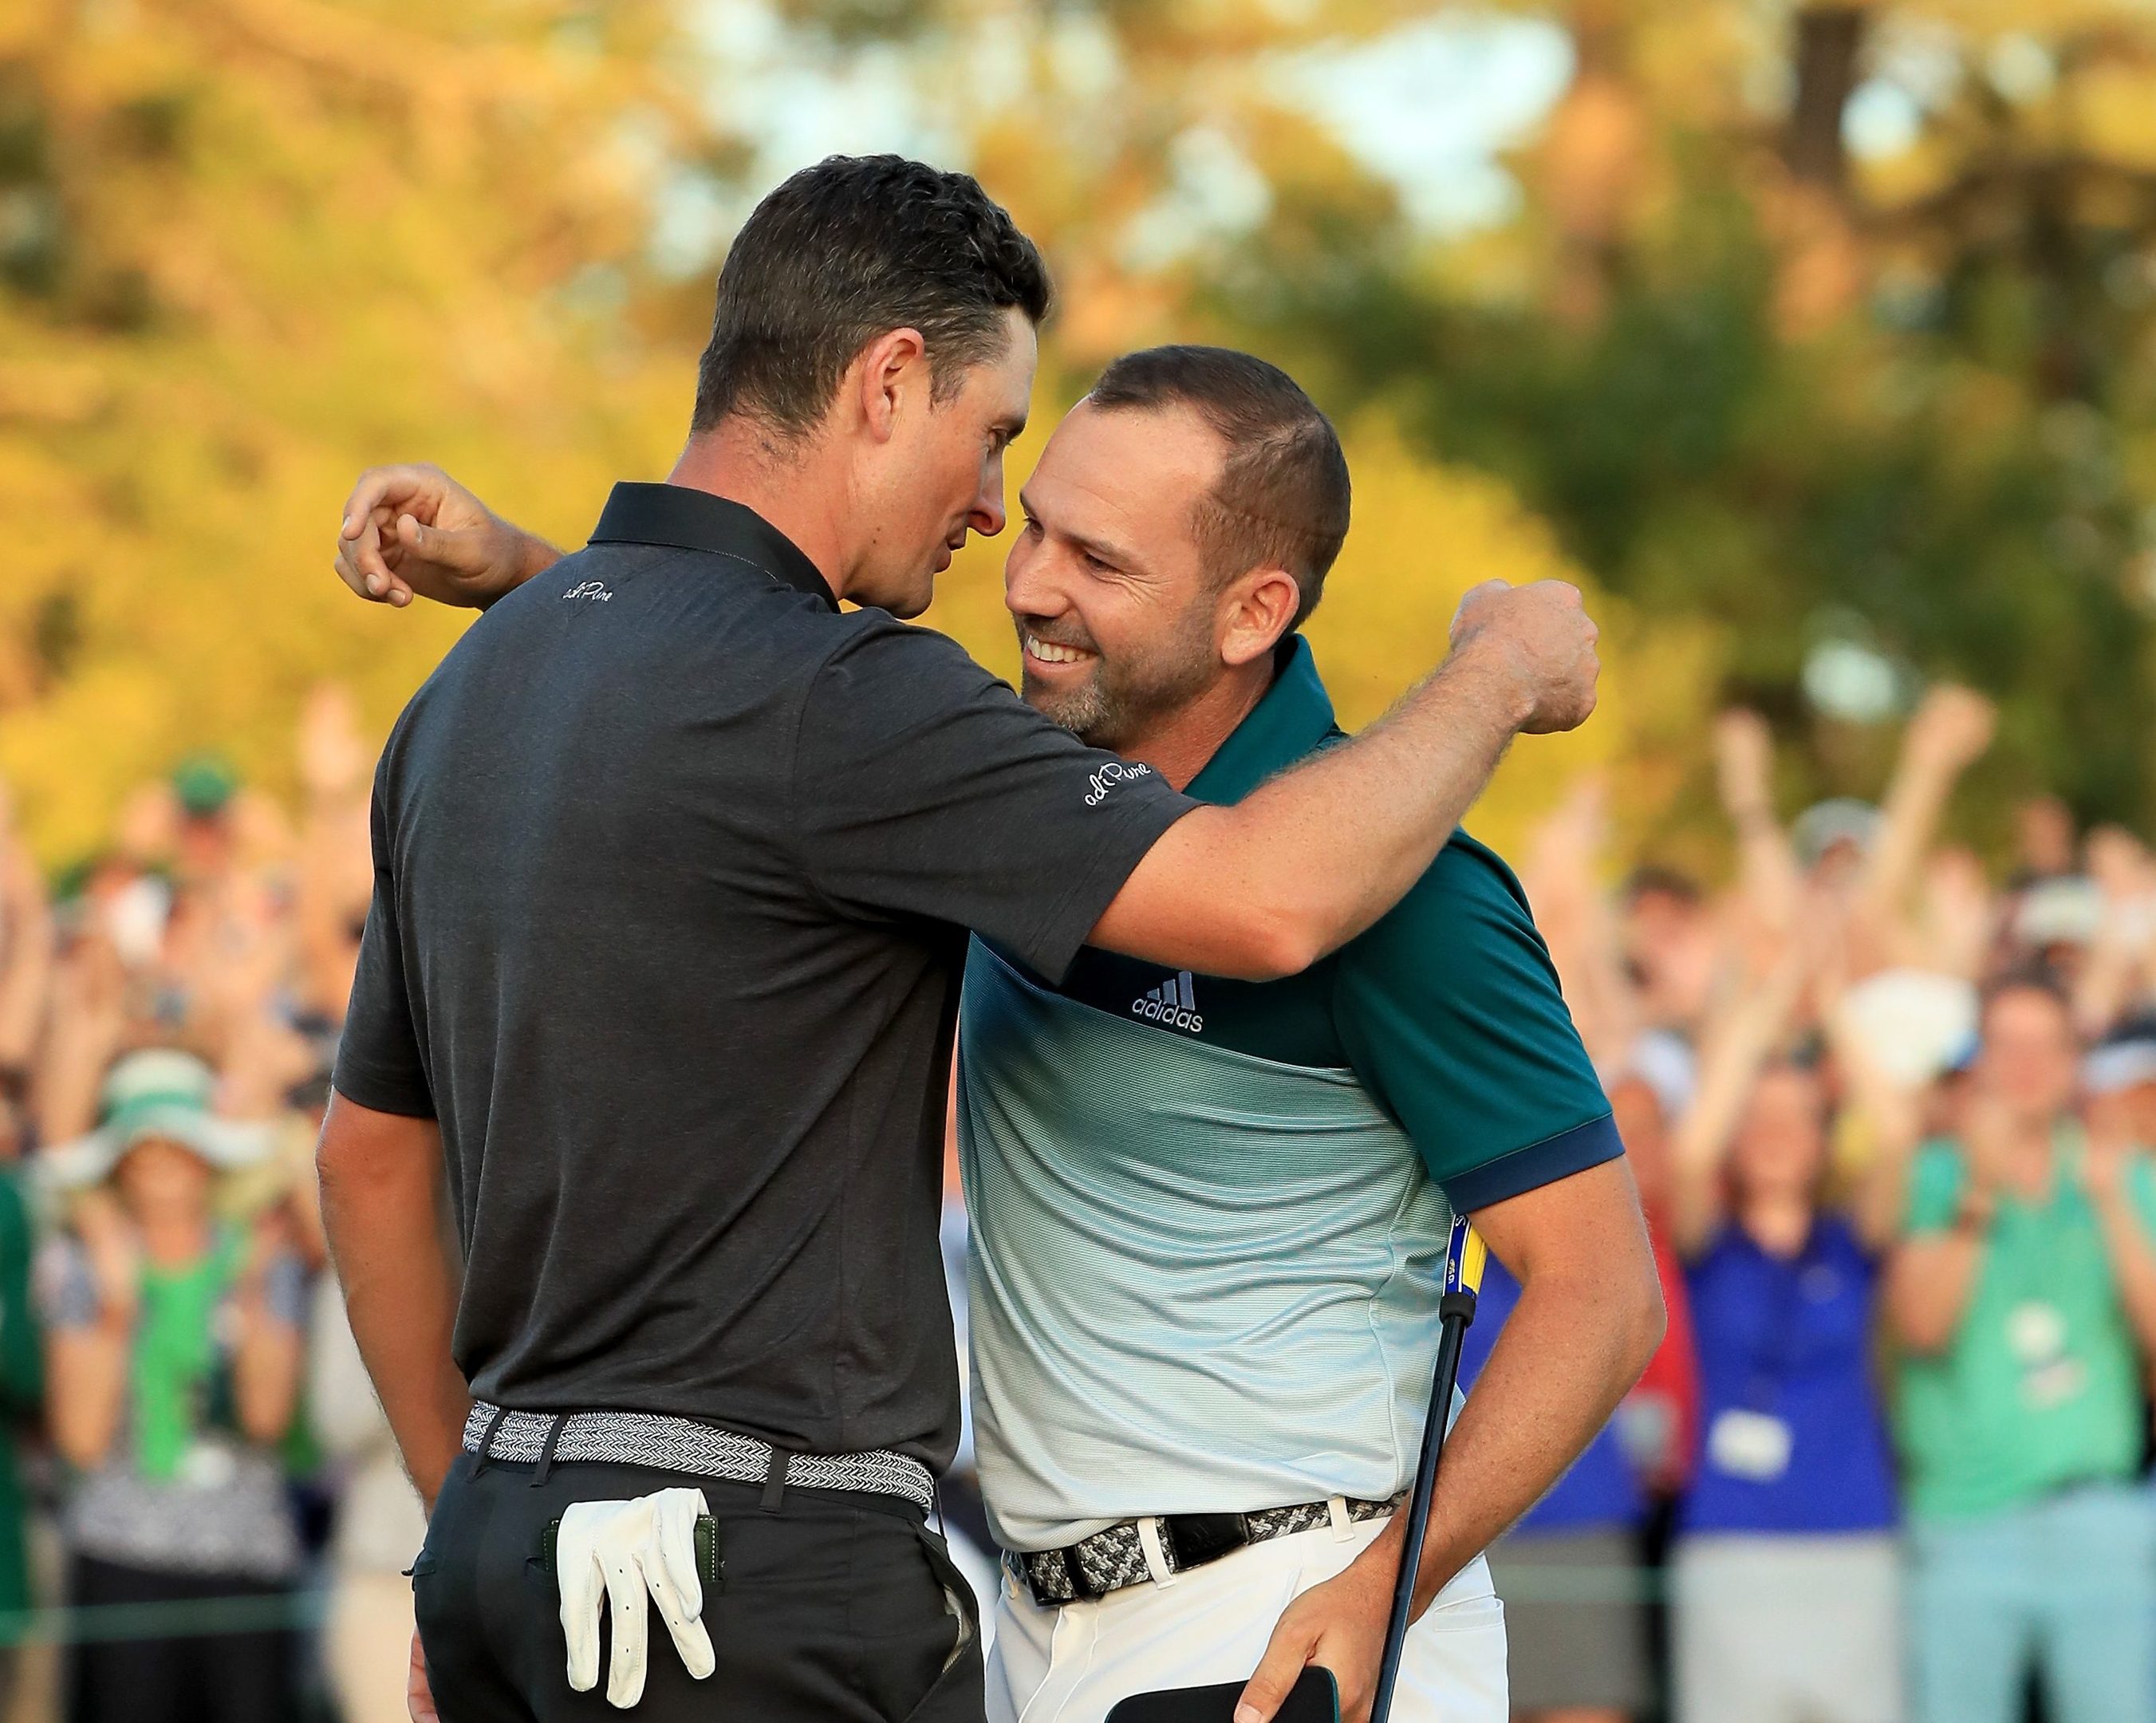 Justin Rose (L) of England congratulates Sergio Garcia (R) of Spain after Garcia won on the first playoff hole during the final round of the 2017 Masters Tournament at Augusta National Golf Club (Andrew Redington/Getty Images)